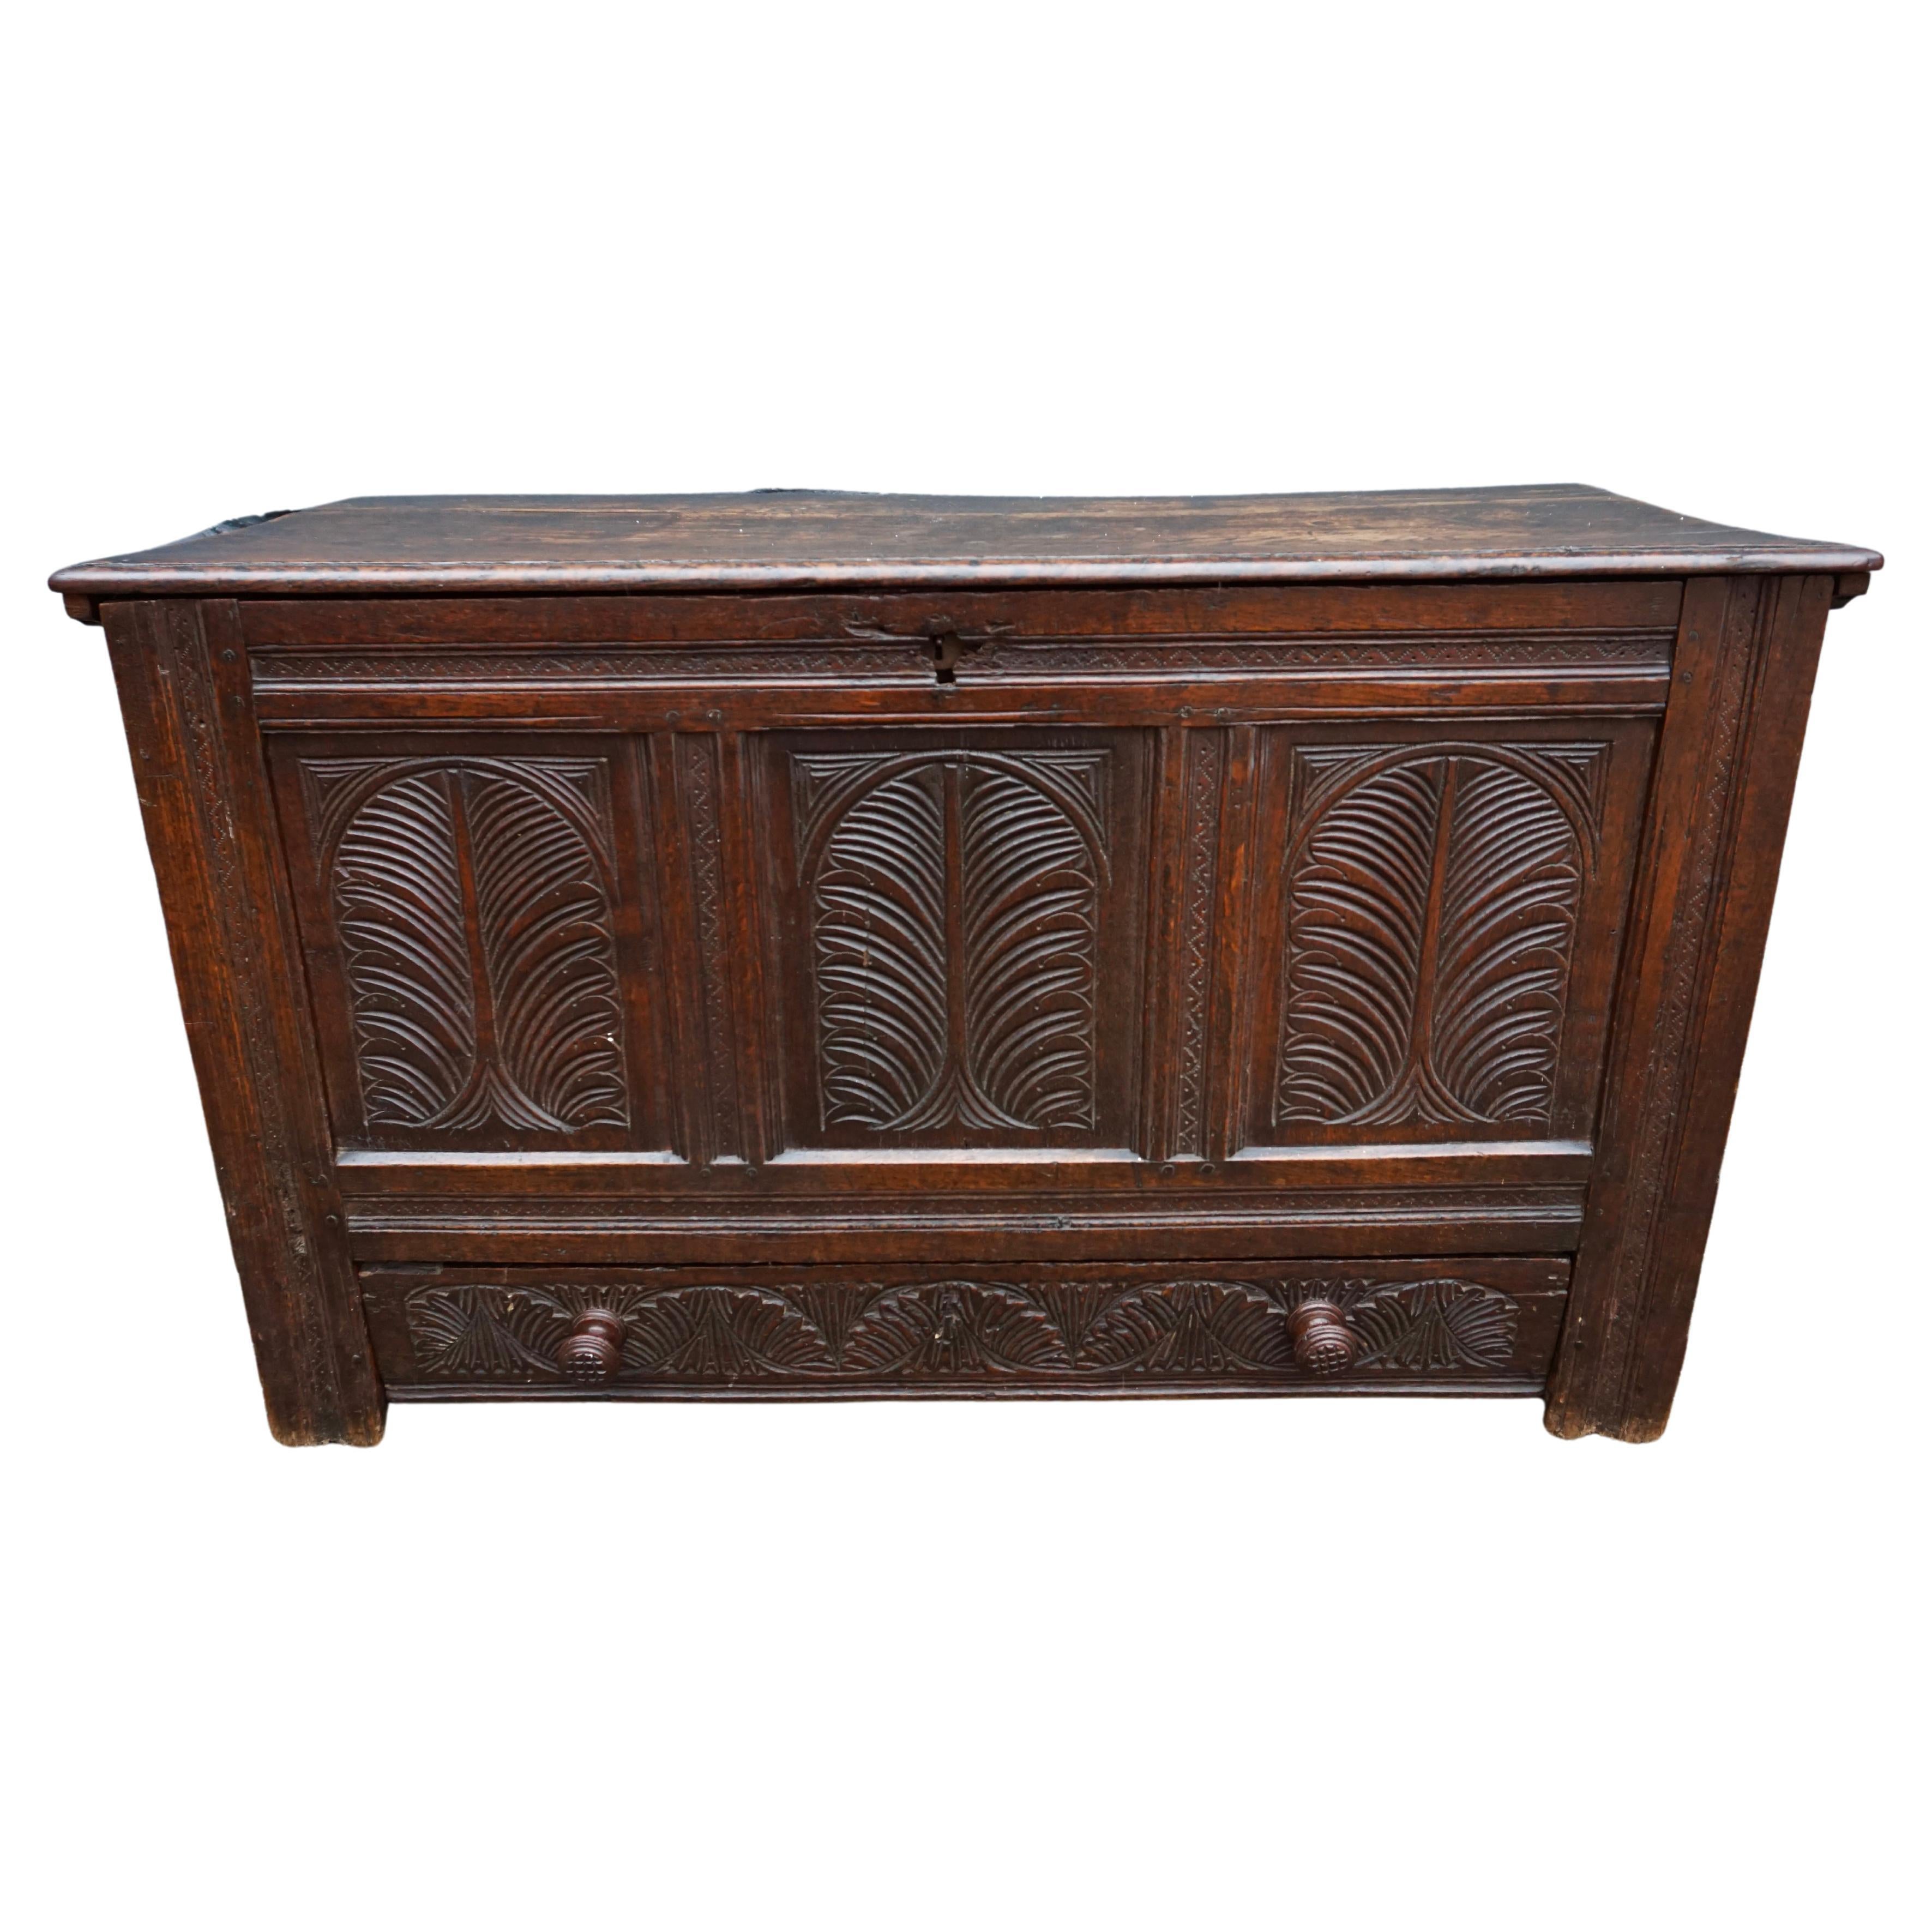 Exquisitely carved and well preserved Medieval England dowry coffer. Remarkable decorative 